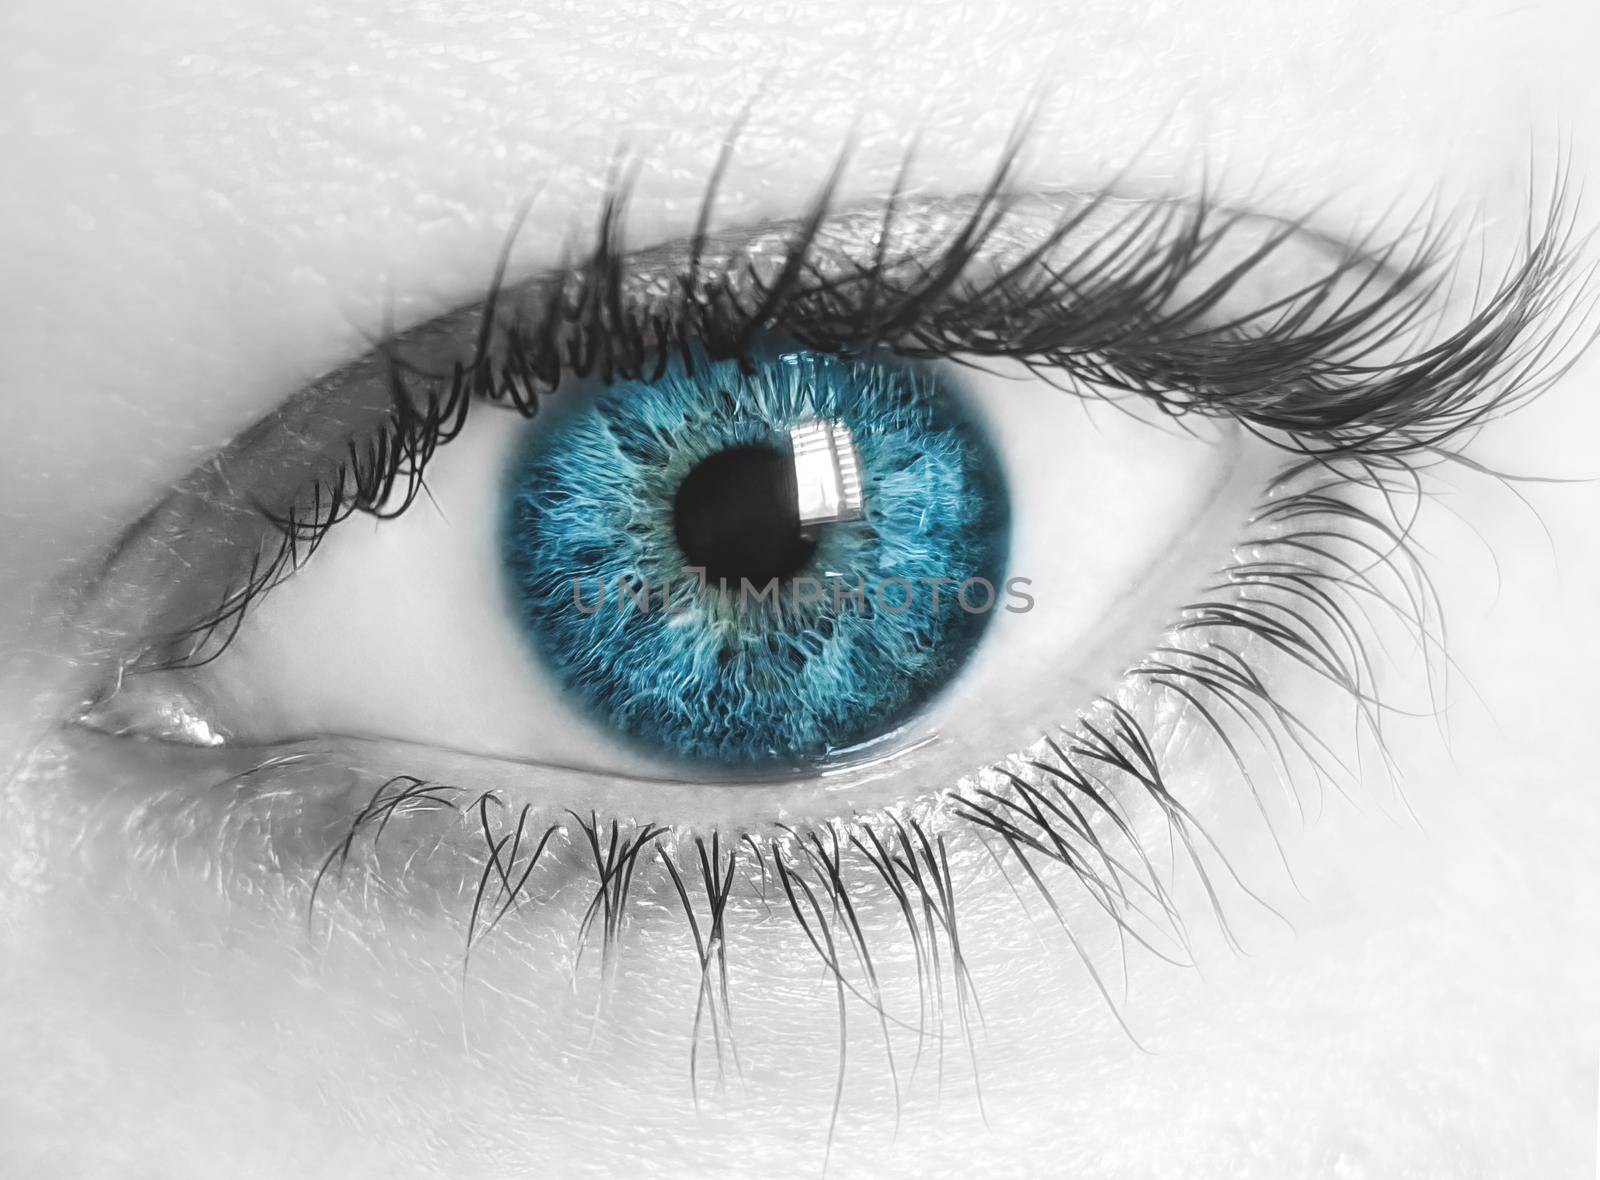 Close-up macro image of human eye with blue iris and desaturated skin by Nickstock